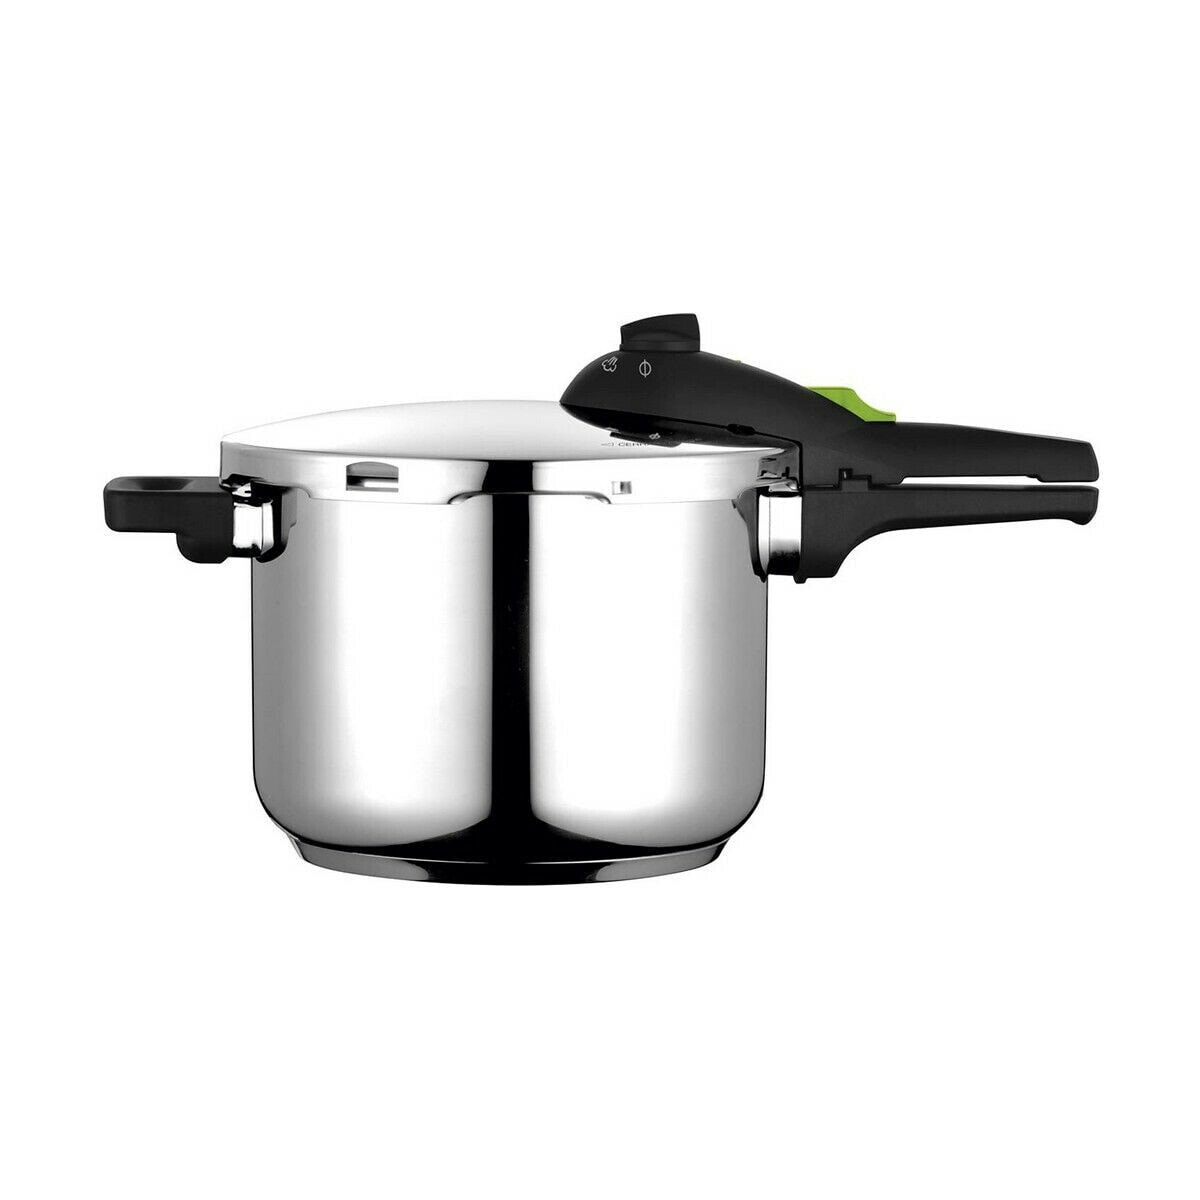 Pressure cooker Fagor Stainless steel 6 L (Refurbished A)